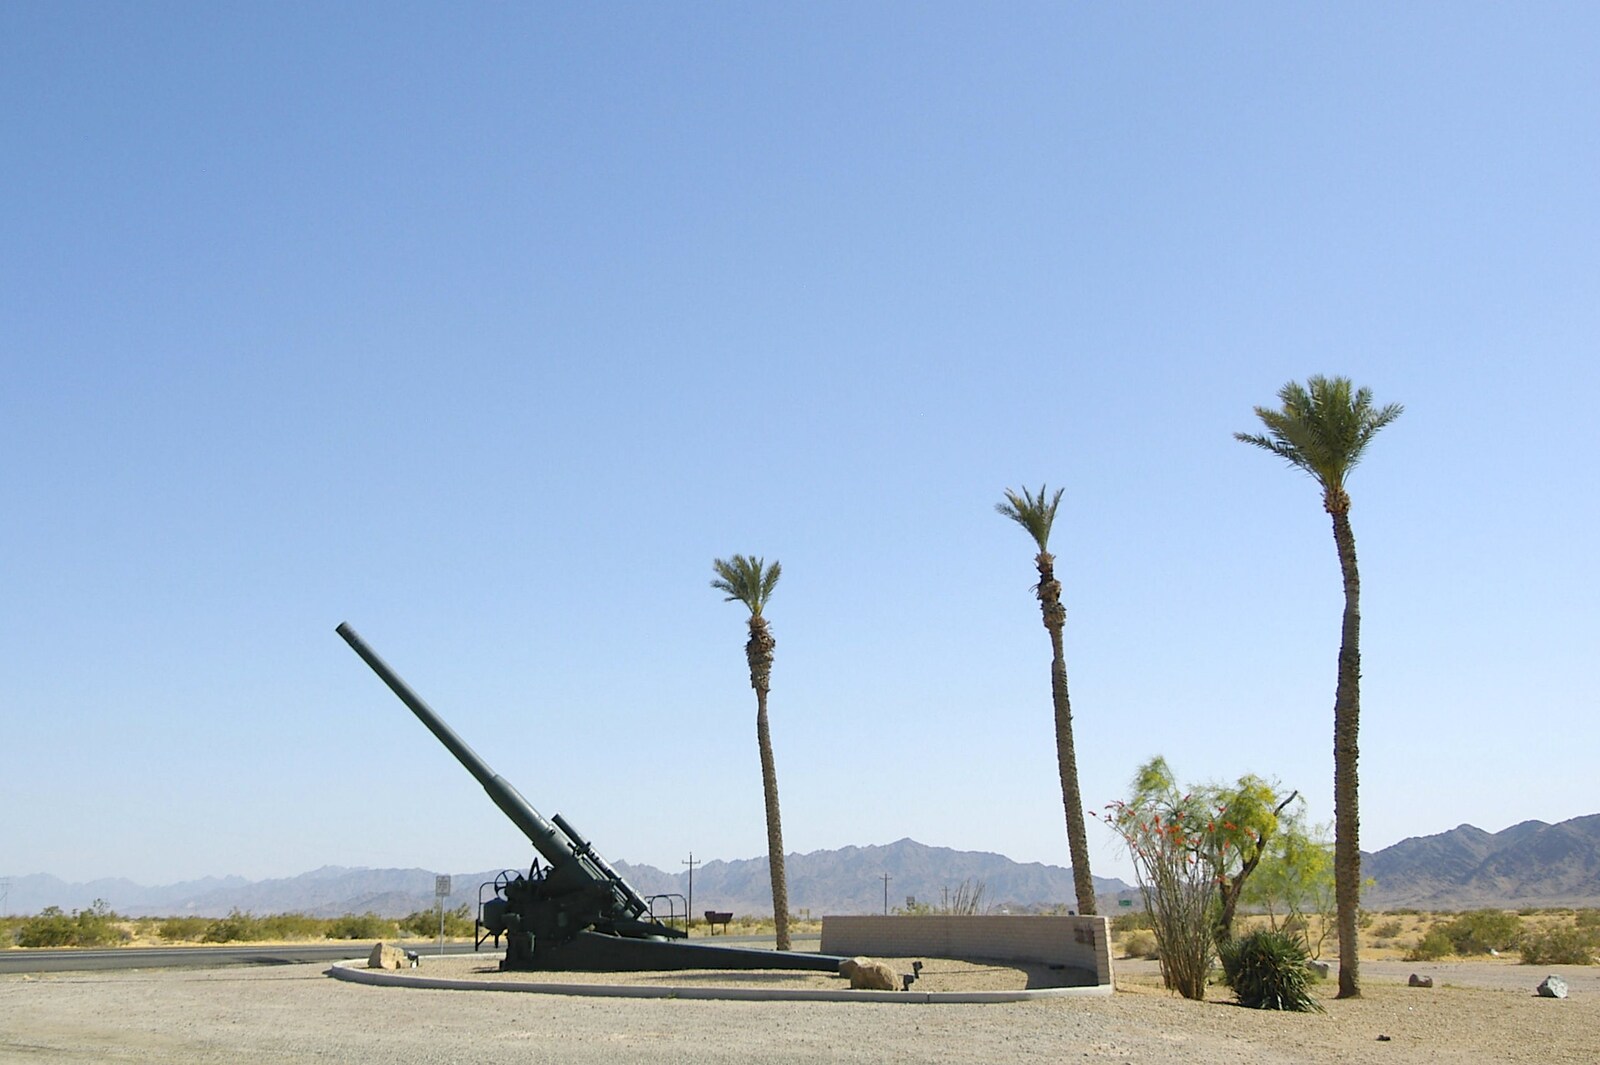 Howitzer, palm, palm, palm from San Diego Seven: The Desert and the Dunes, Arizona and California, US - 22nd April